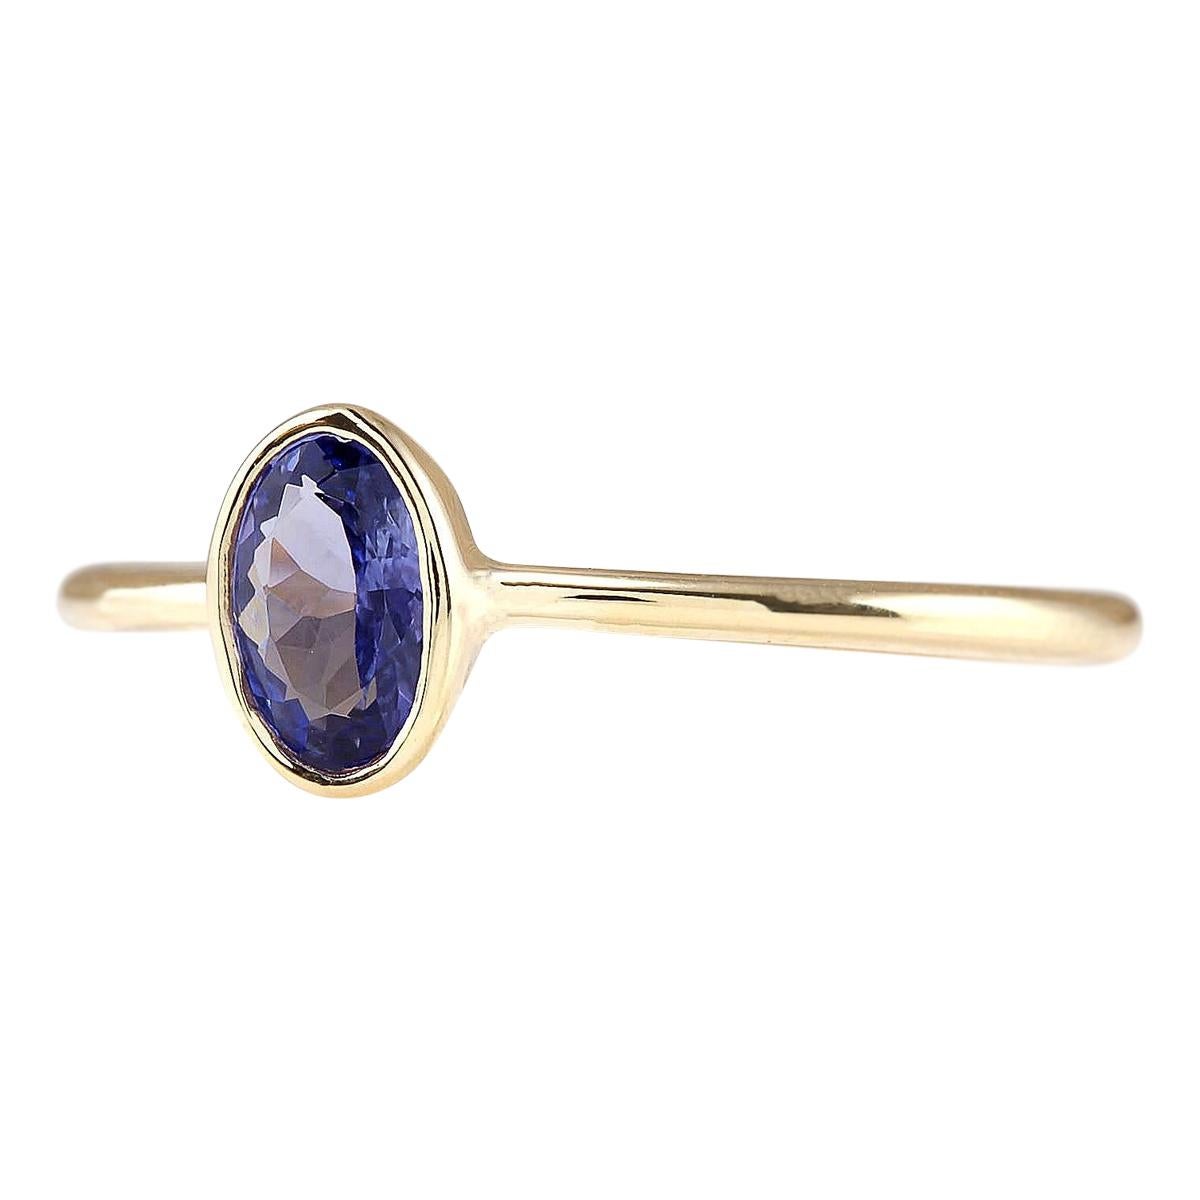 Stamped: 14K Yellow Gold
Total Ring Weight: 1.2 Grams
Total Natural Tanzanite Weight is 0.60 Carat (Measures: 6.00x4.00 mm)
Color: Blue
Face Measures: 6.00x4.00 mm
Sku: [703396W]